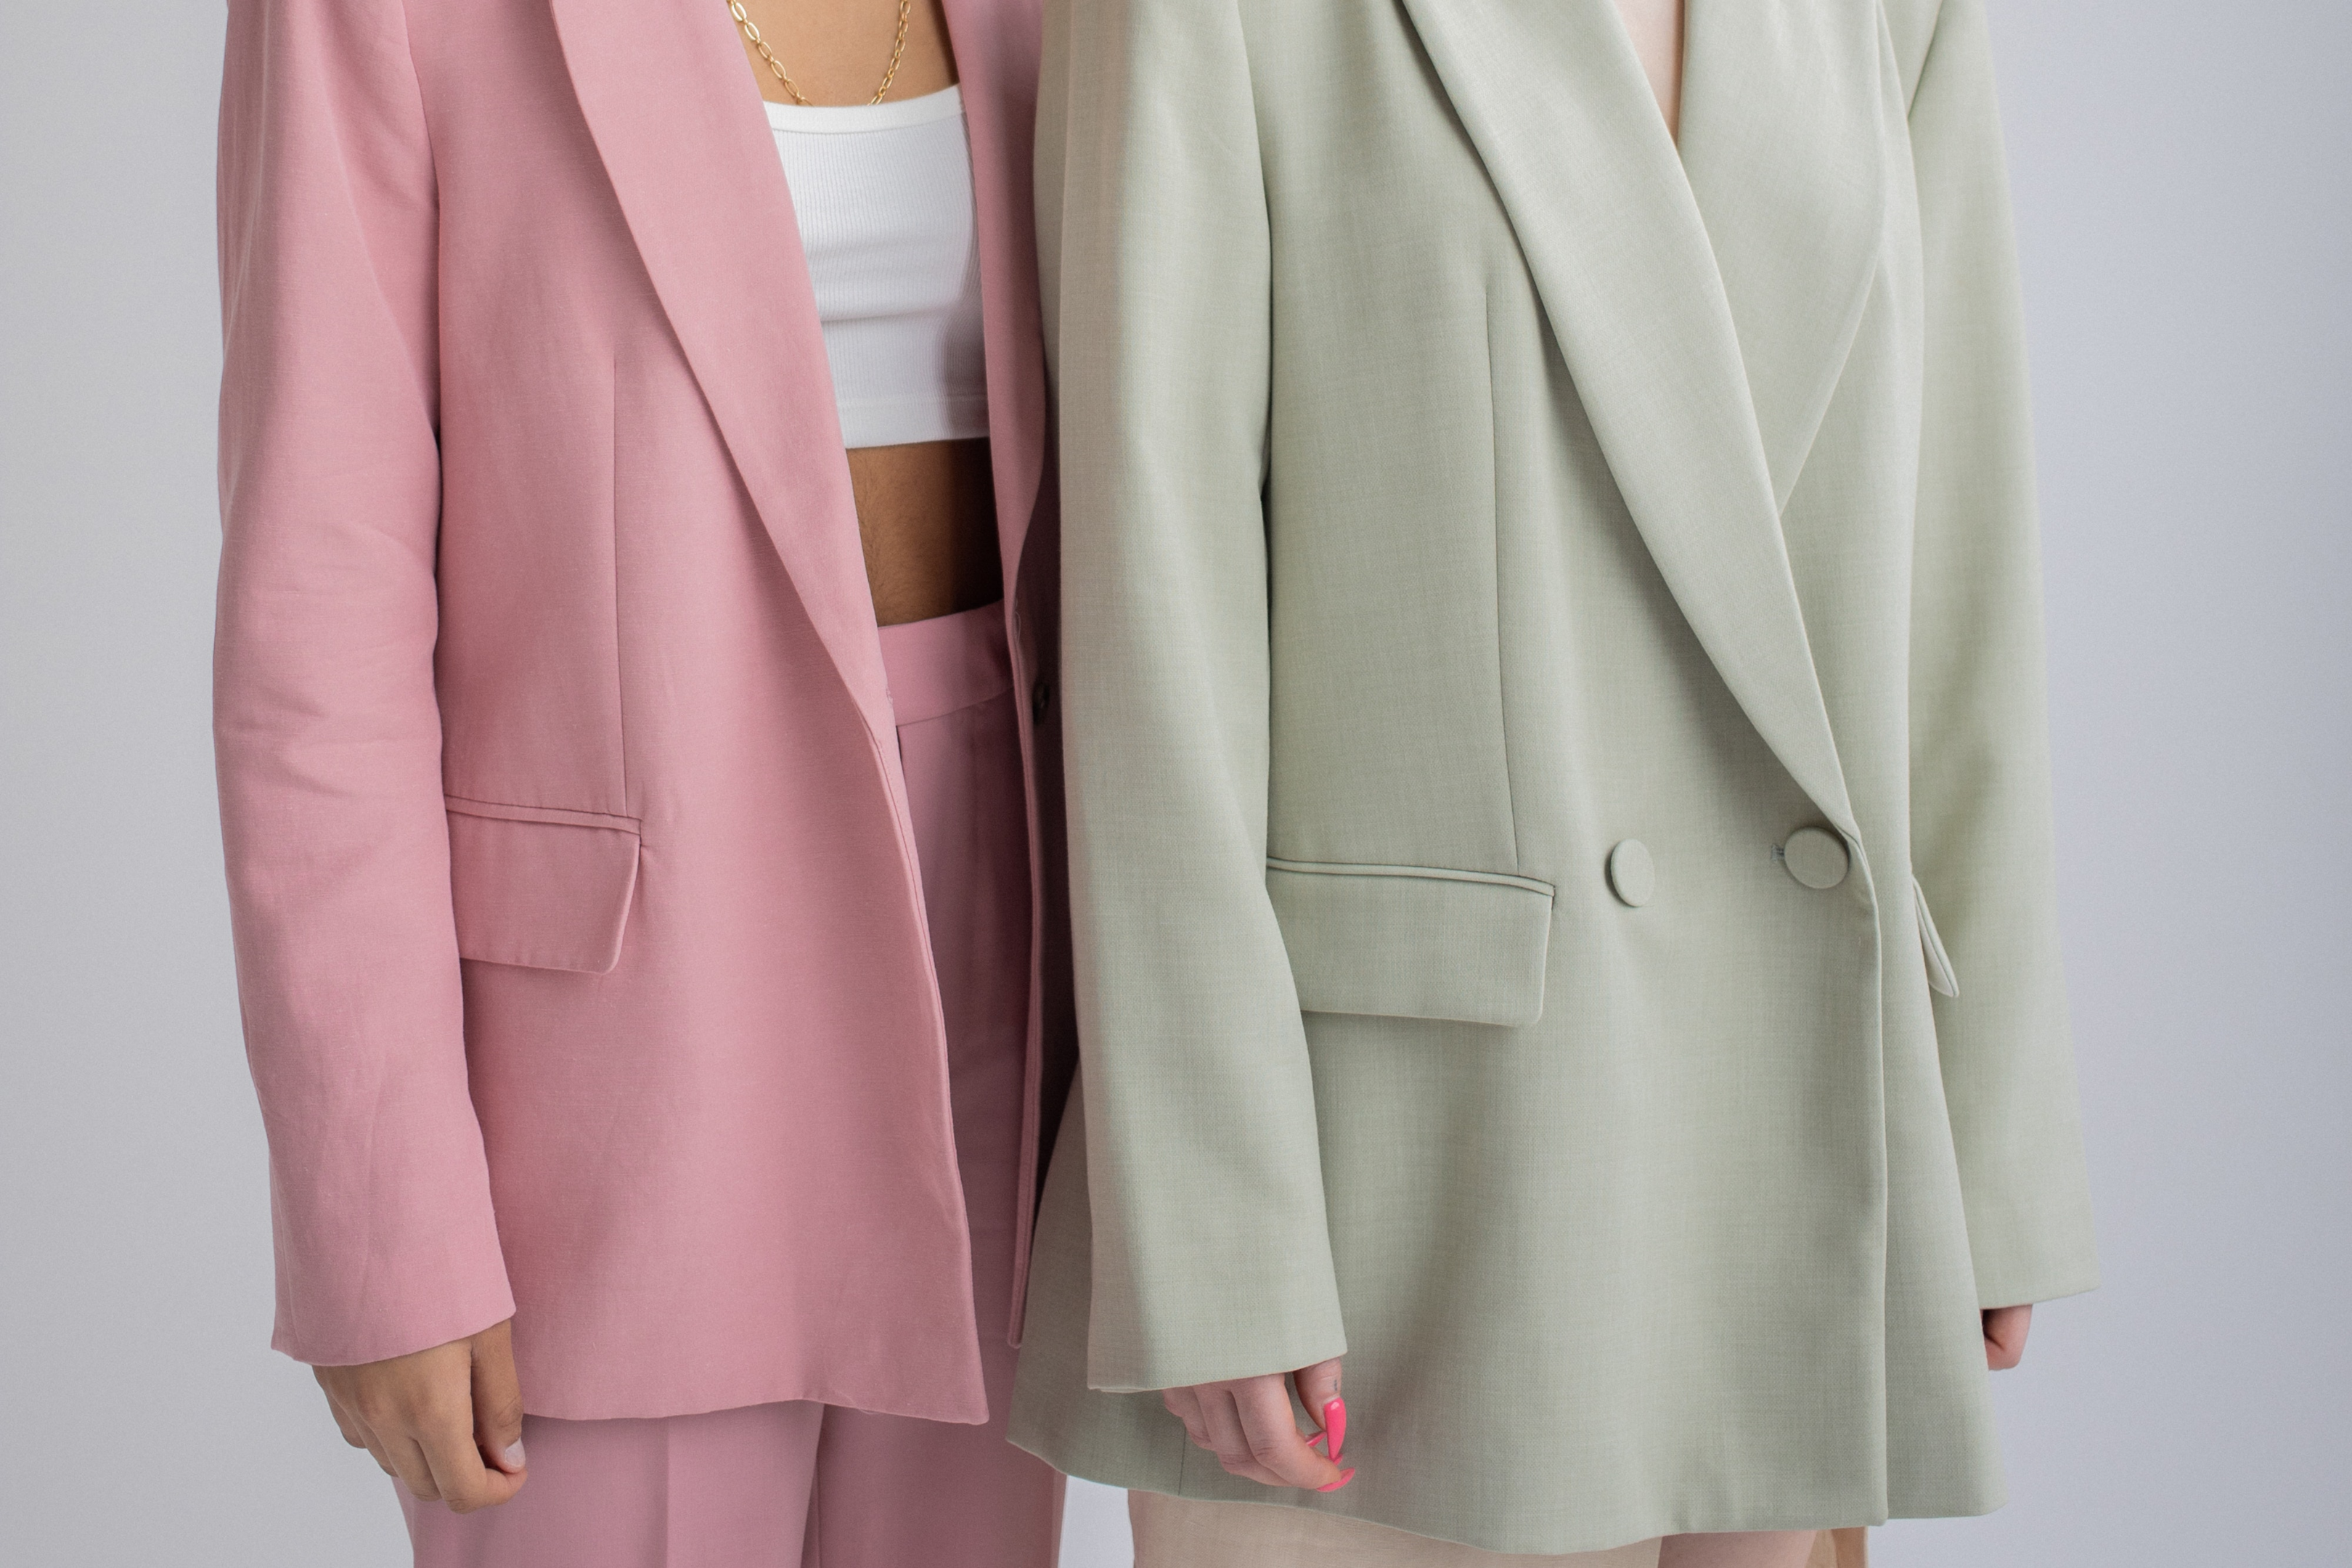 Simple blazers and trousers on pastel colors.